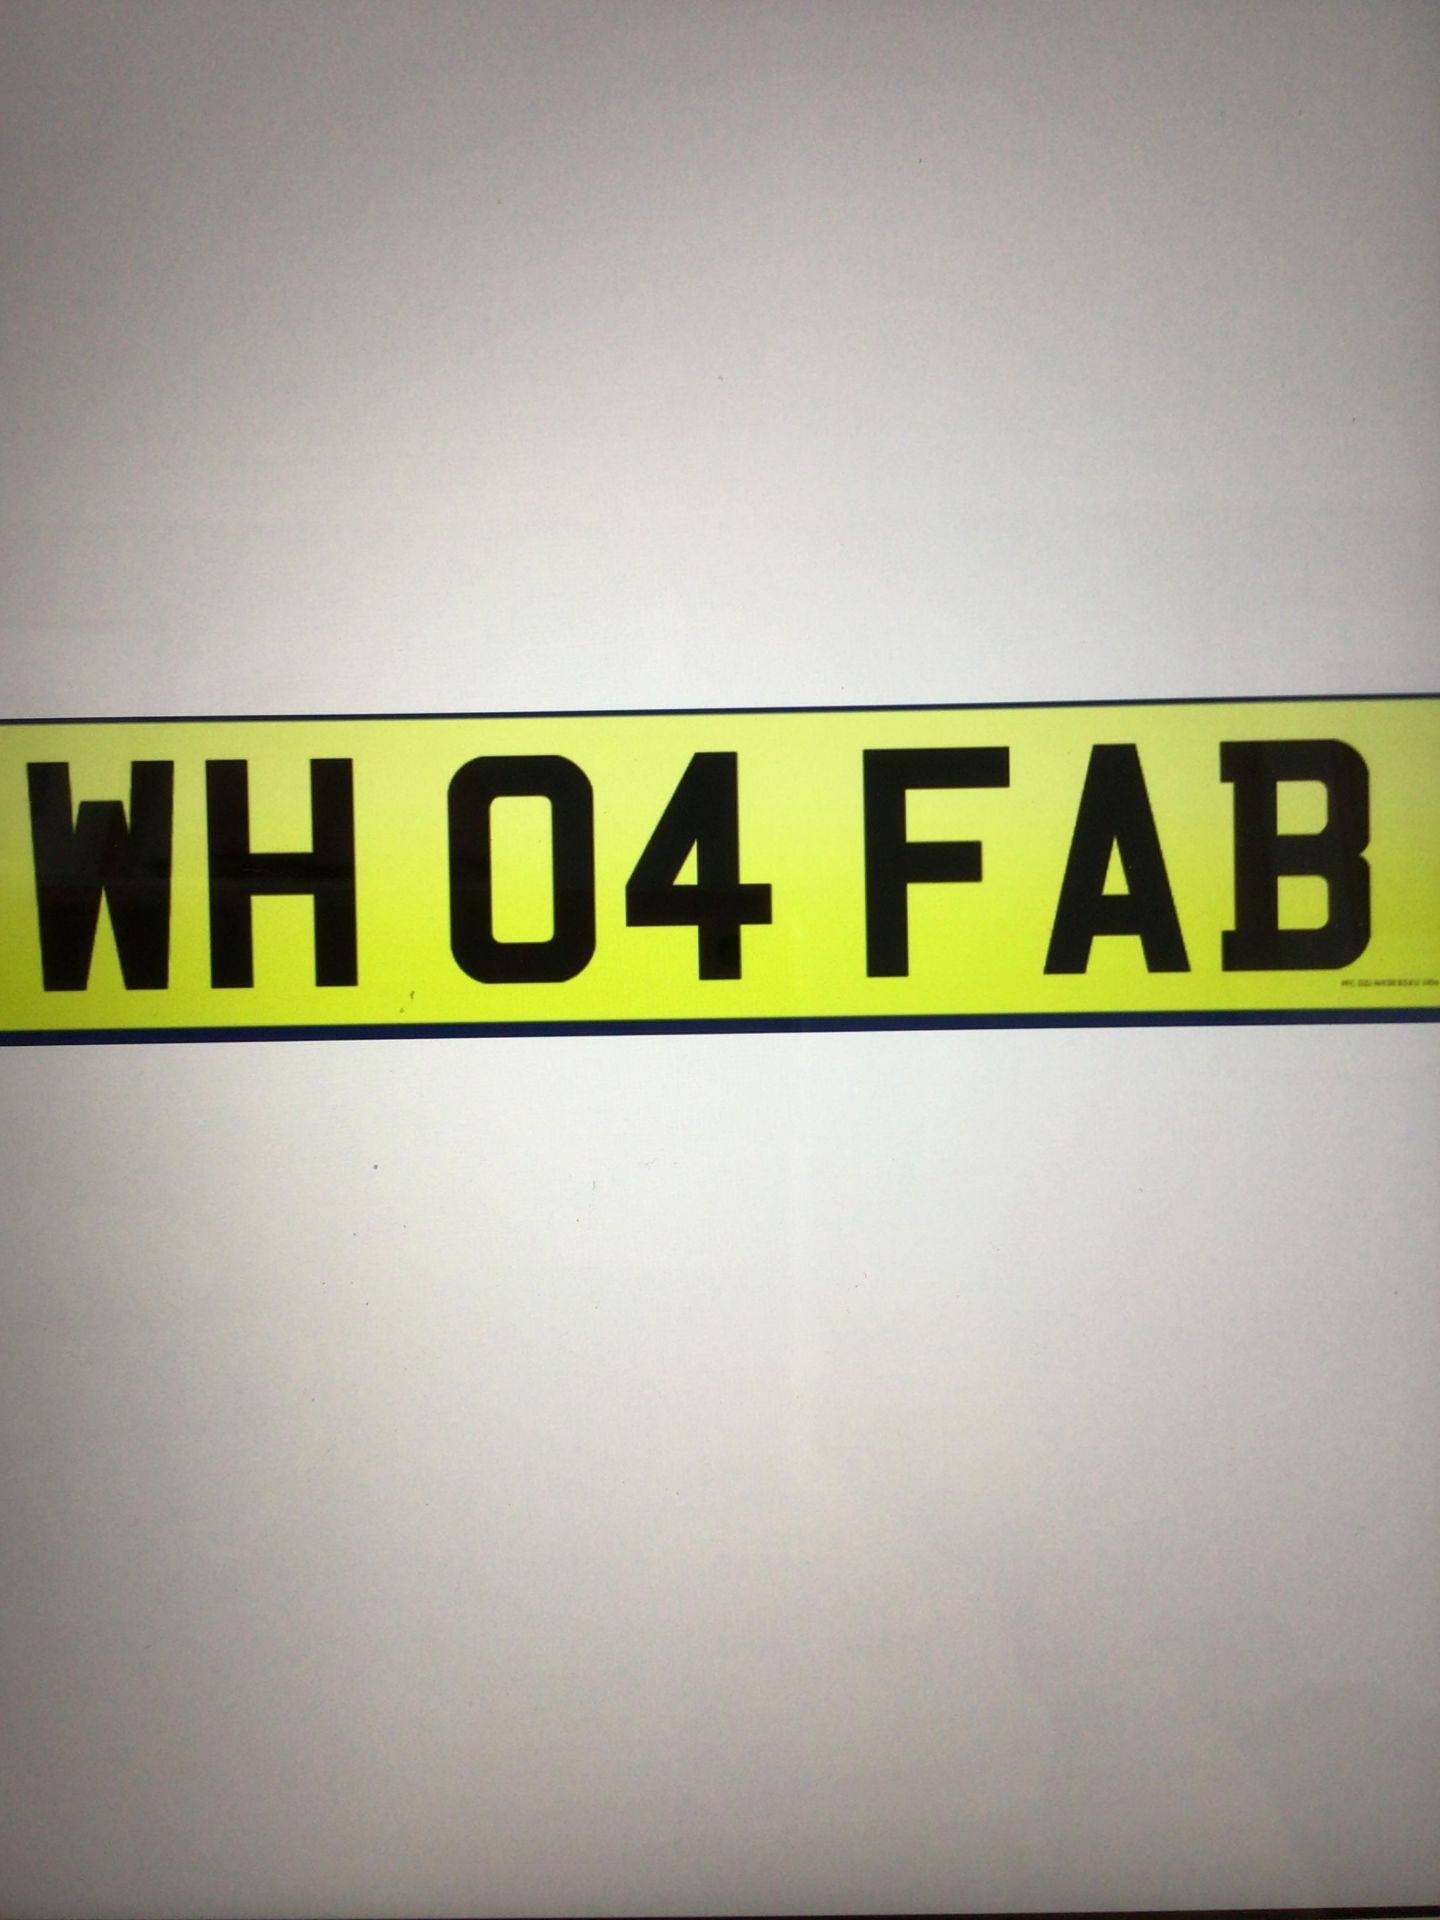 Cherished number plate